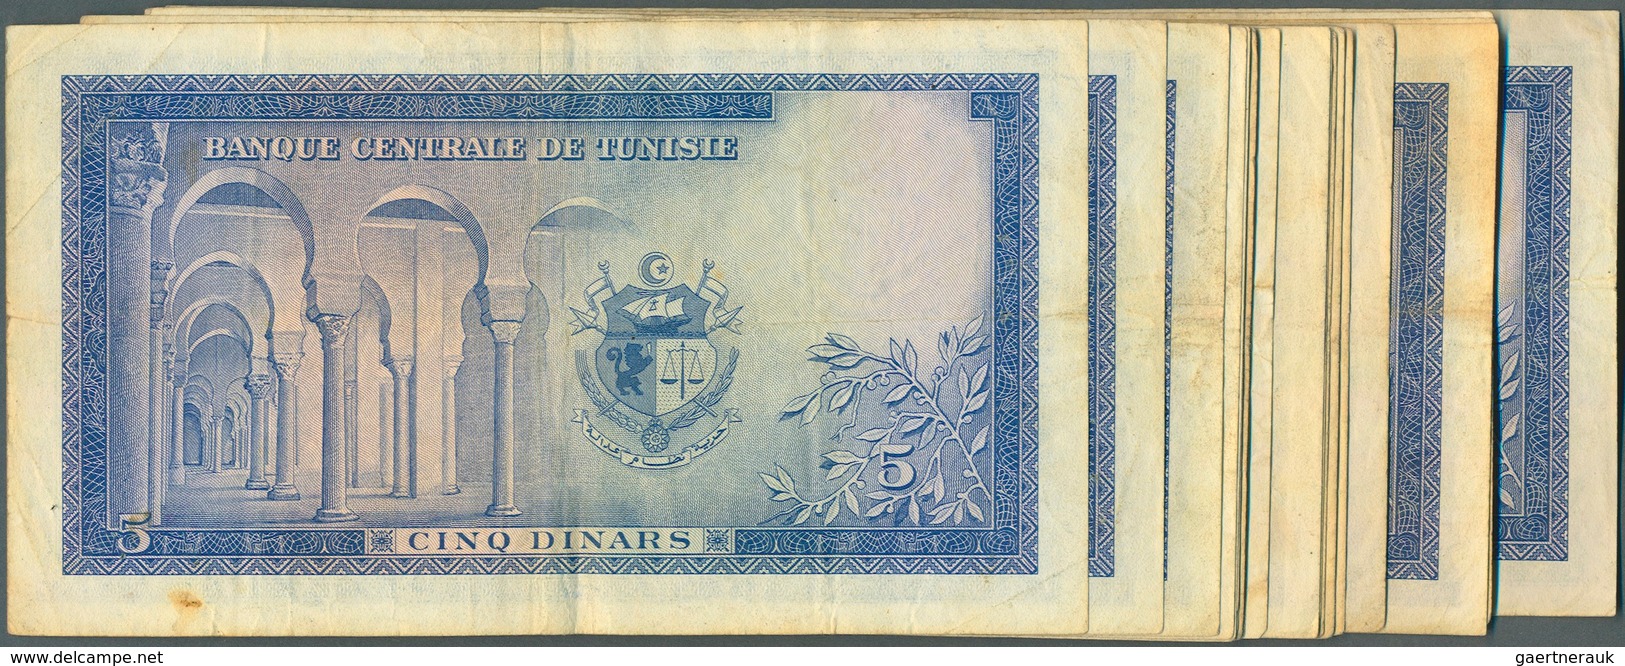 Tunisia / Tunisien: Lot With 23 X 5 Dinars 1962, P.61 In Used Condition With Several Handling Marks, - Tusesië